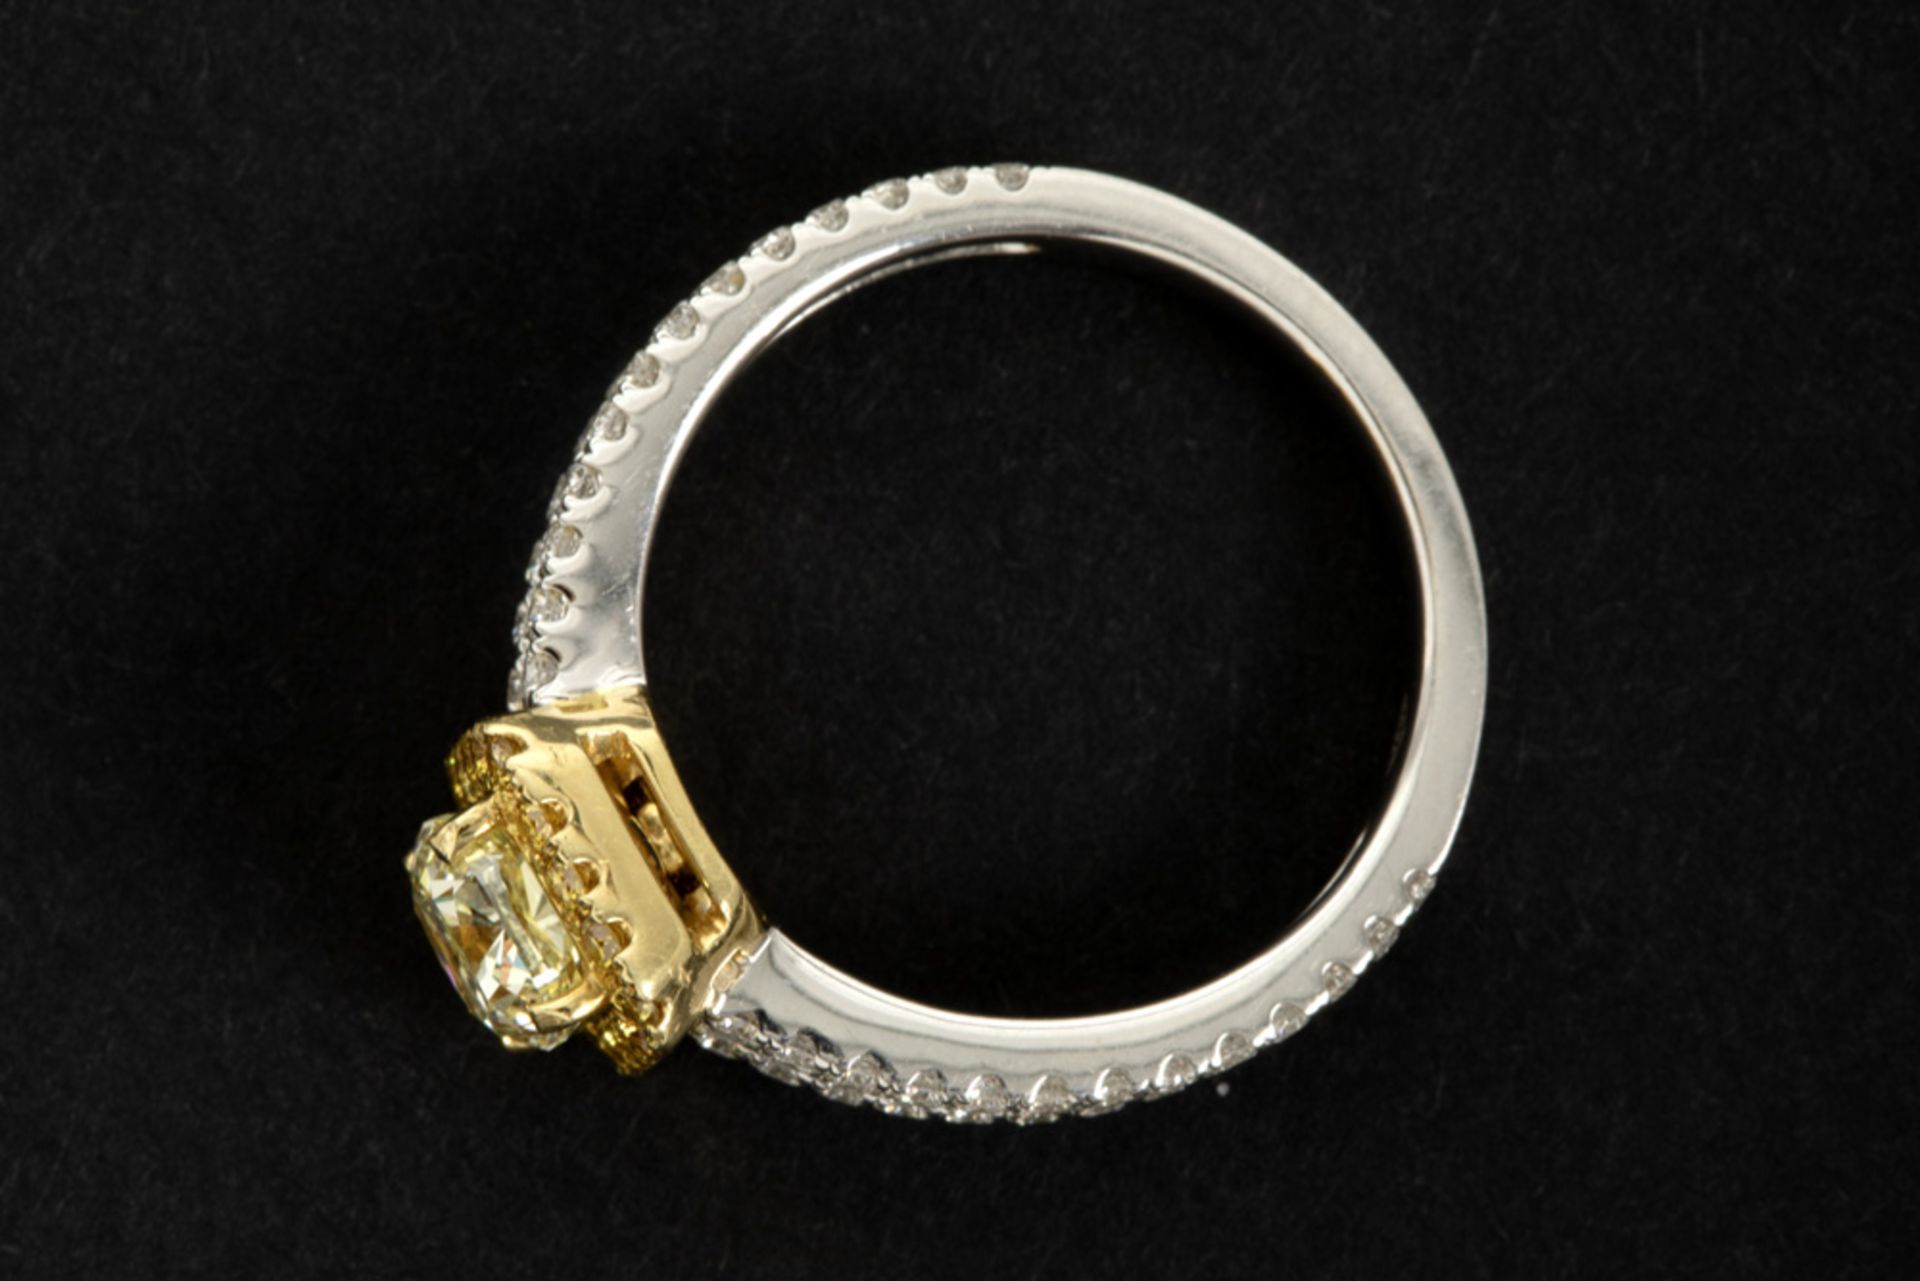 ring with a fashionable design in white and yellow gold (18 carat) with a central 1,58 carat high - Bild 2 aus 2